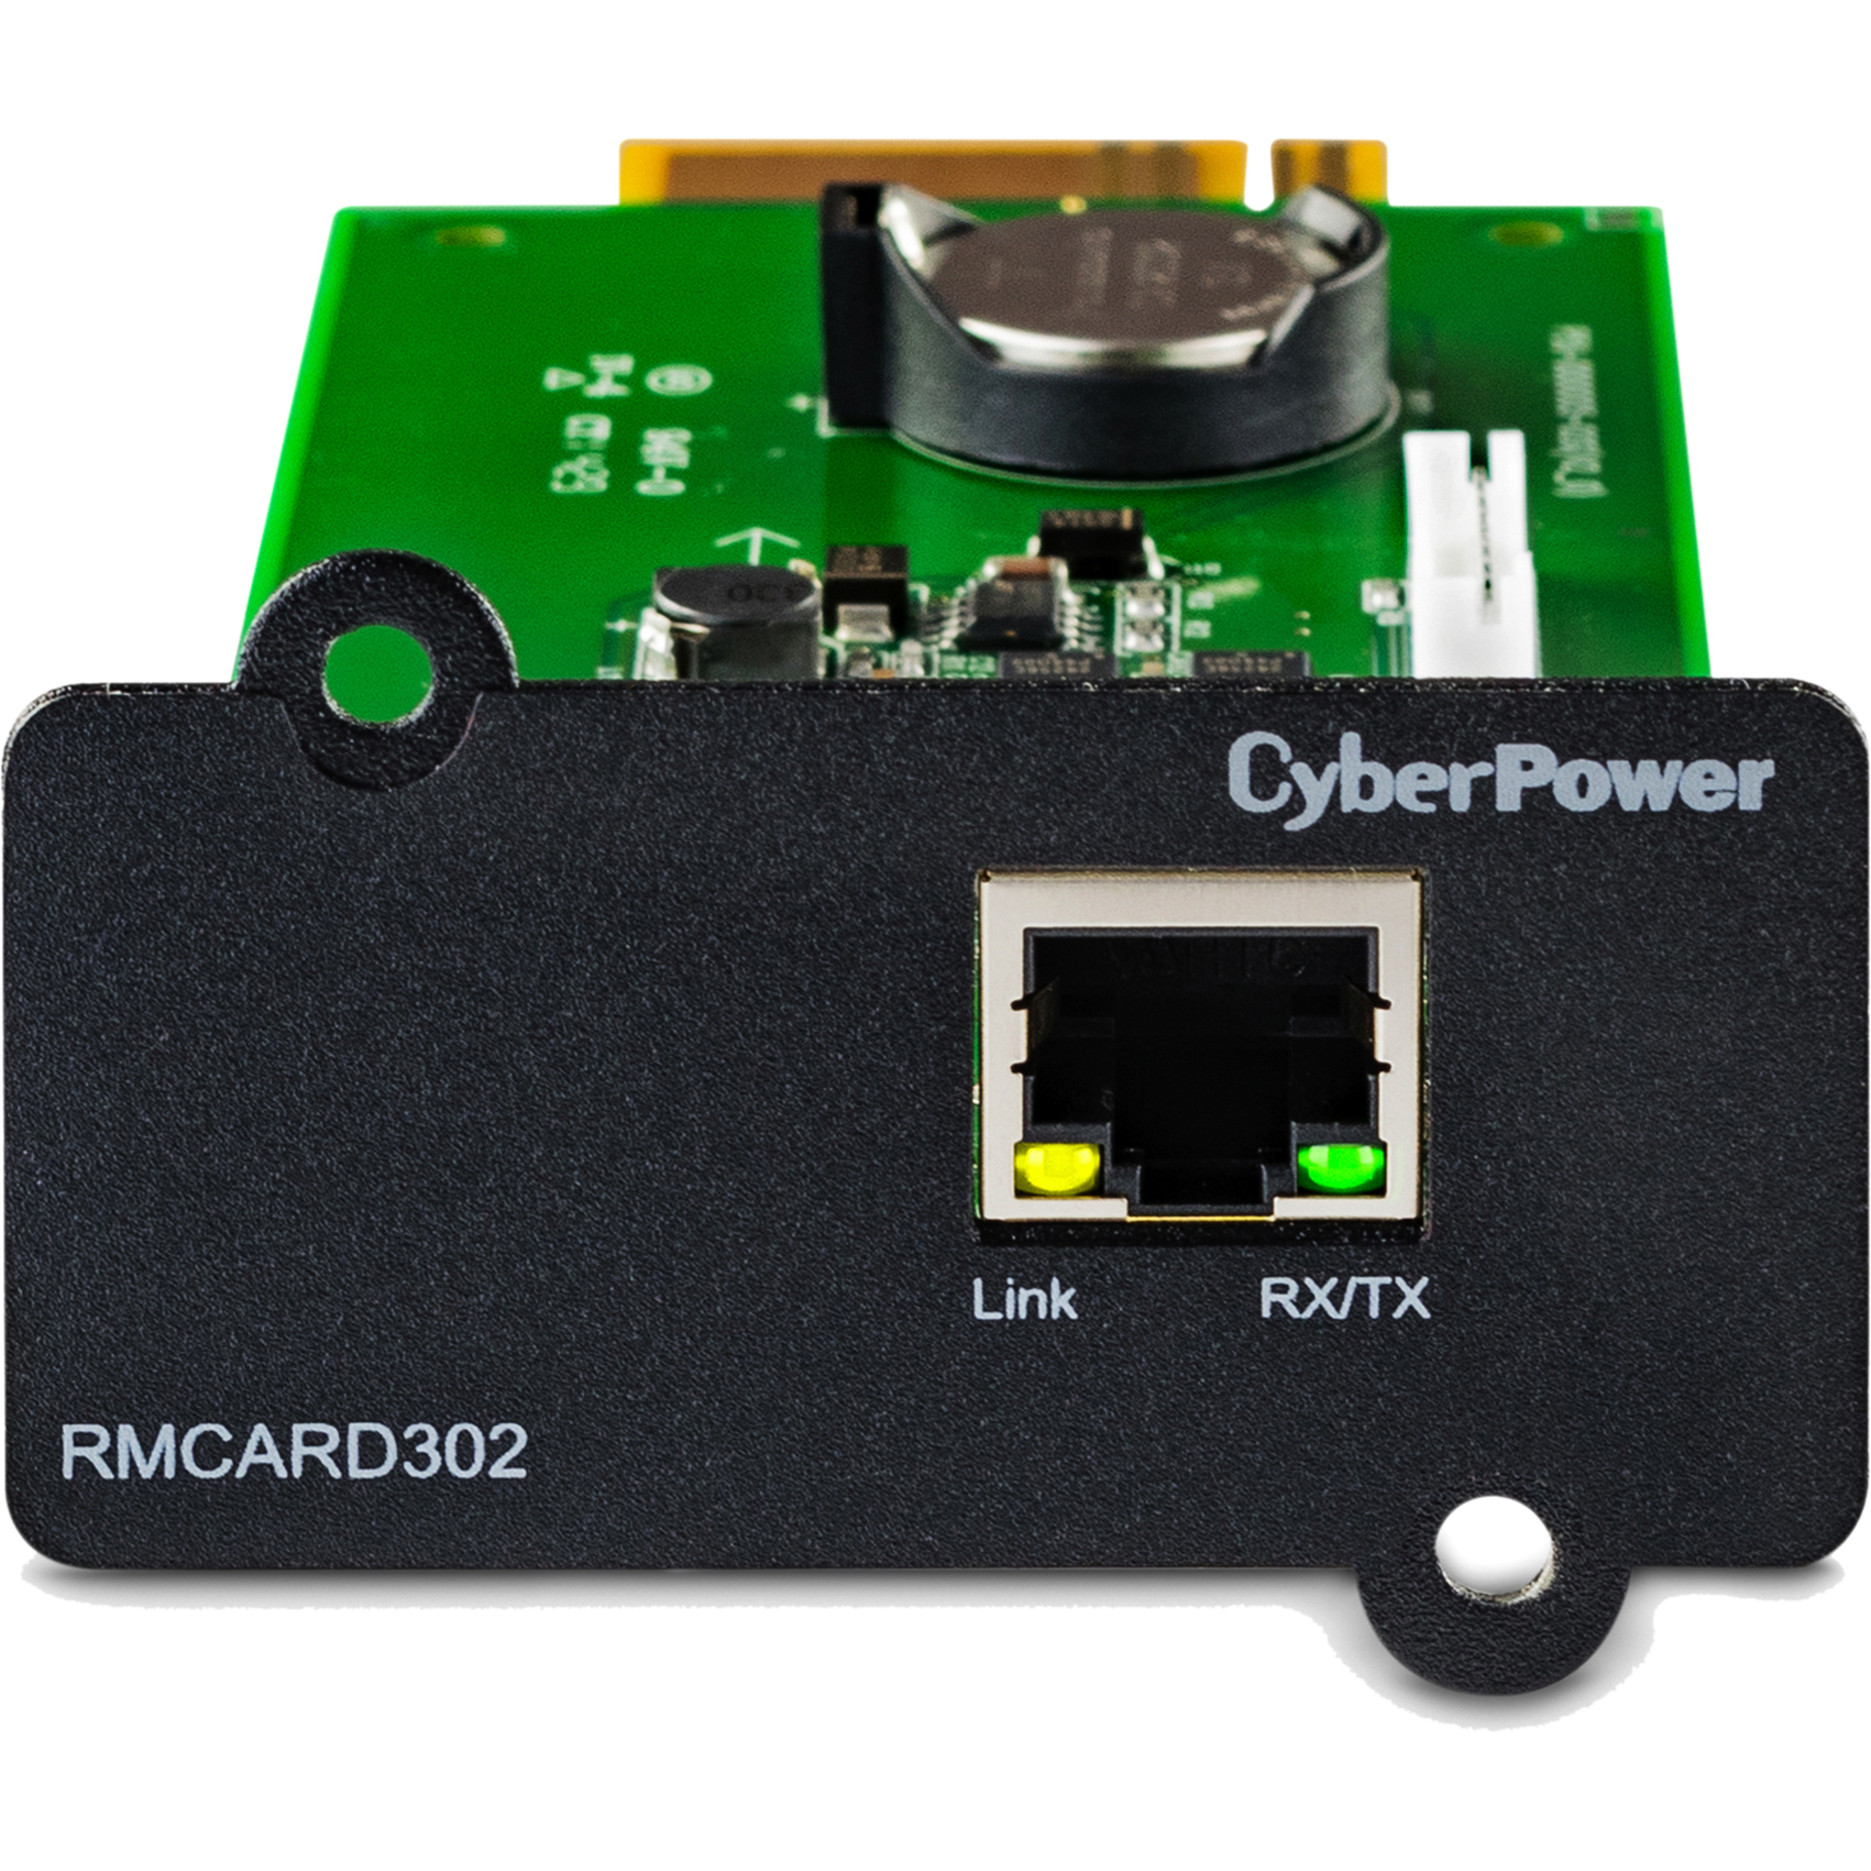 Cyber Power RMCARD302 OL Series Remote Management CardSNMP/HTTP/NMSMini Slot RMCARD302